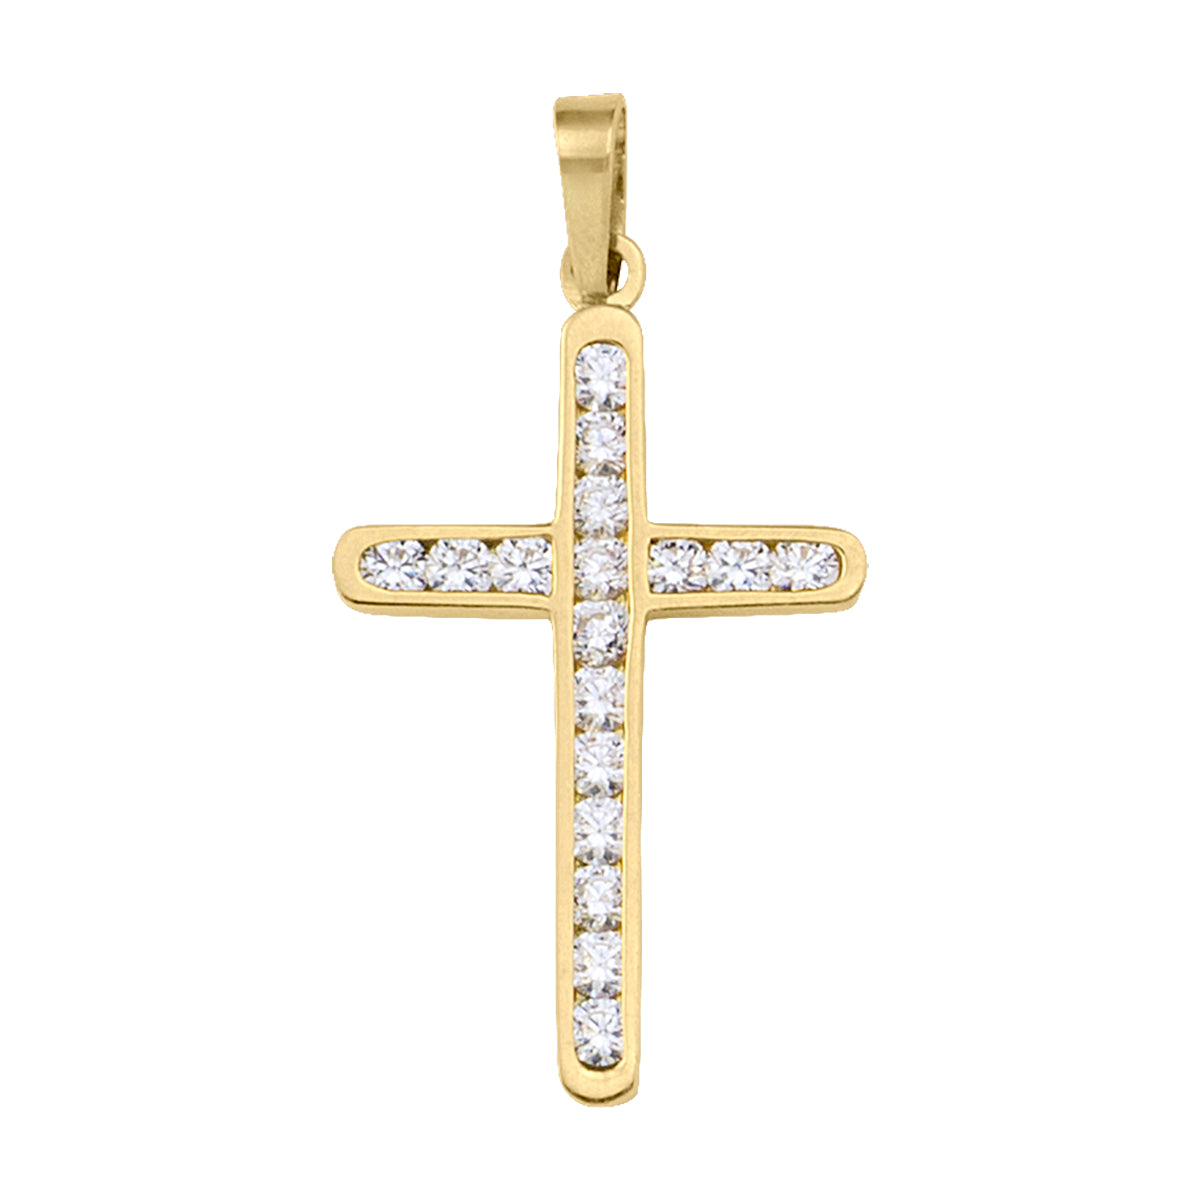 18 k Gold Cross with Stones